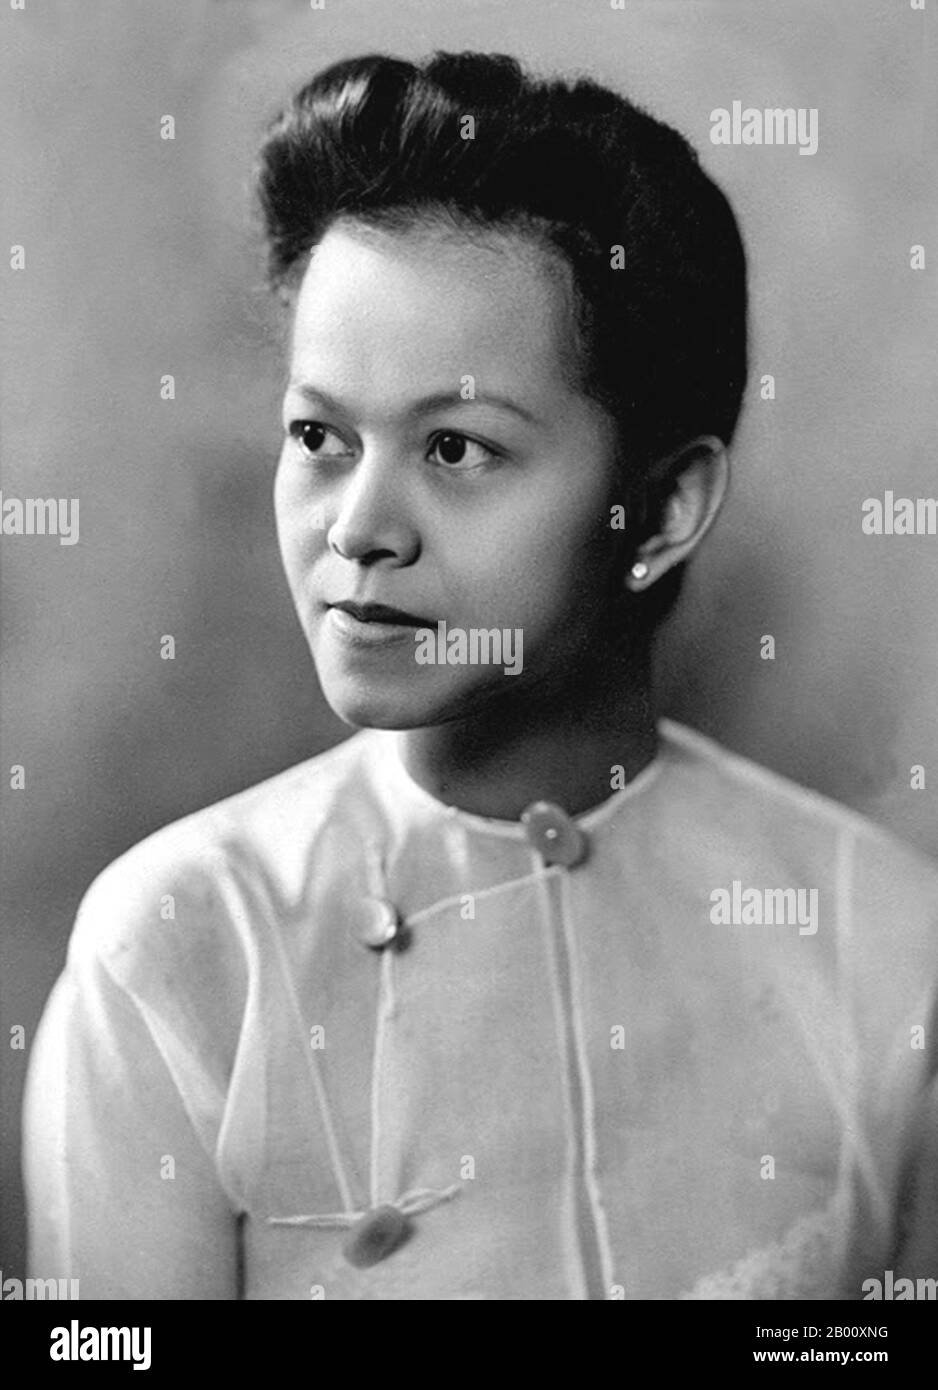 Burma/Myanmar: Daw Mi Mi Khaing (1916-1990), writer, feminist and educator, c. 1950.  Mi Mi Khaing (1916 – 15 March 1990) was a Burmese scholar and writer who authored numerous books and articles on life in Burma during the 20th century. She is notable as one of the first women to write in English about Burmese culture and traditions. Born of Mon ancestry, Mi Mi Khaing grew up during the British colonial rule of Burma and was educated in British schools. She married Sao Saimong, a noted scholar and a member of the royal family of Kengtung in Shan State. Stock Photo